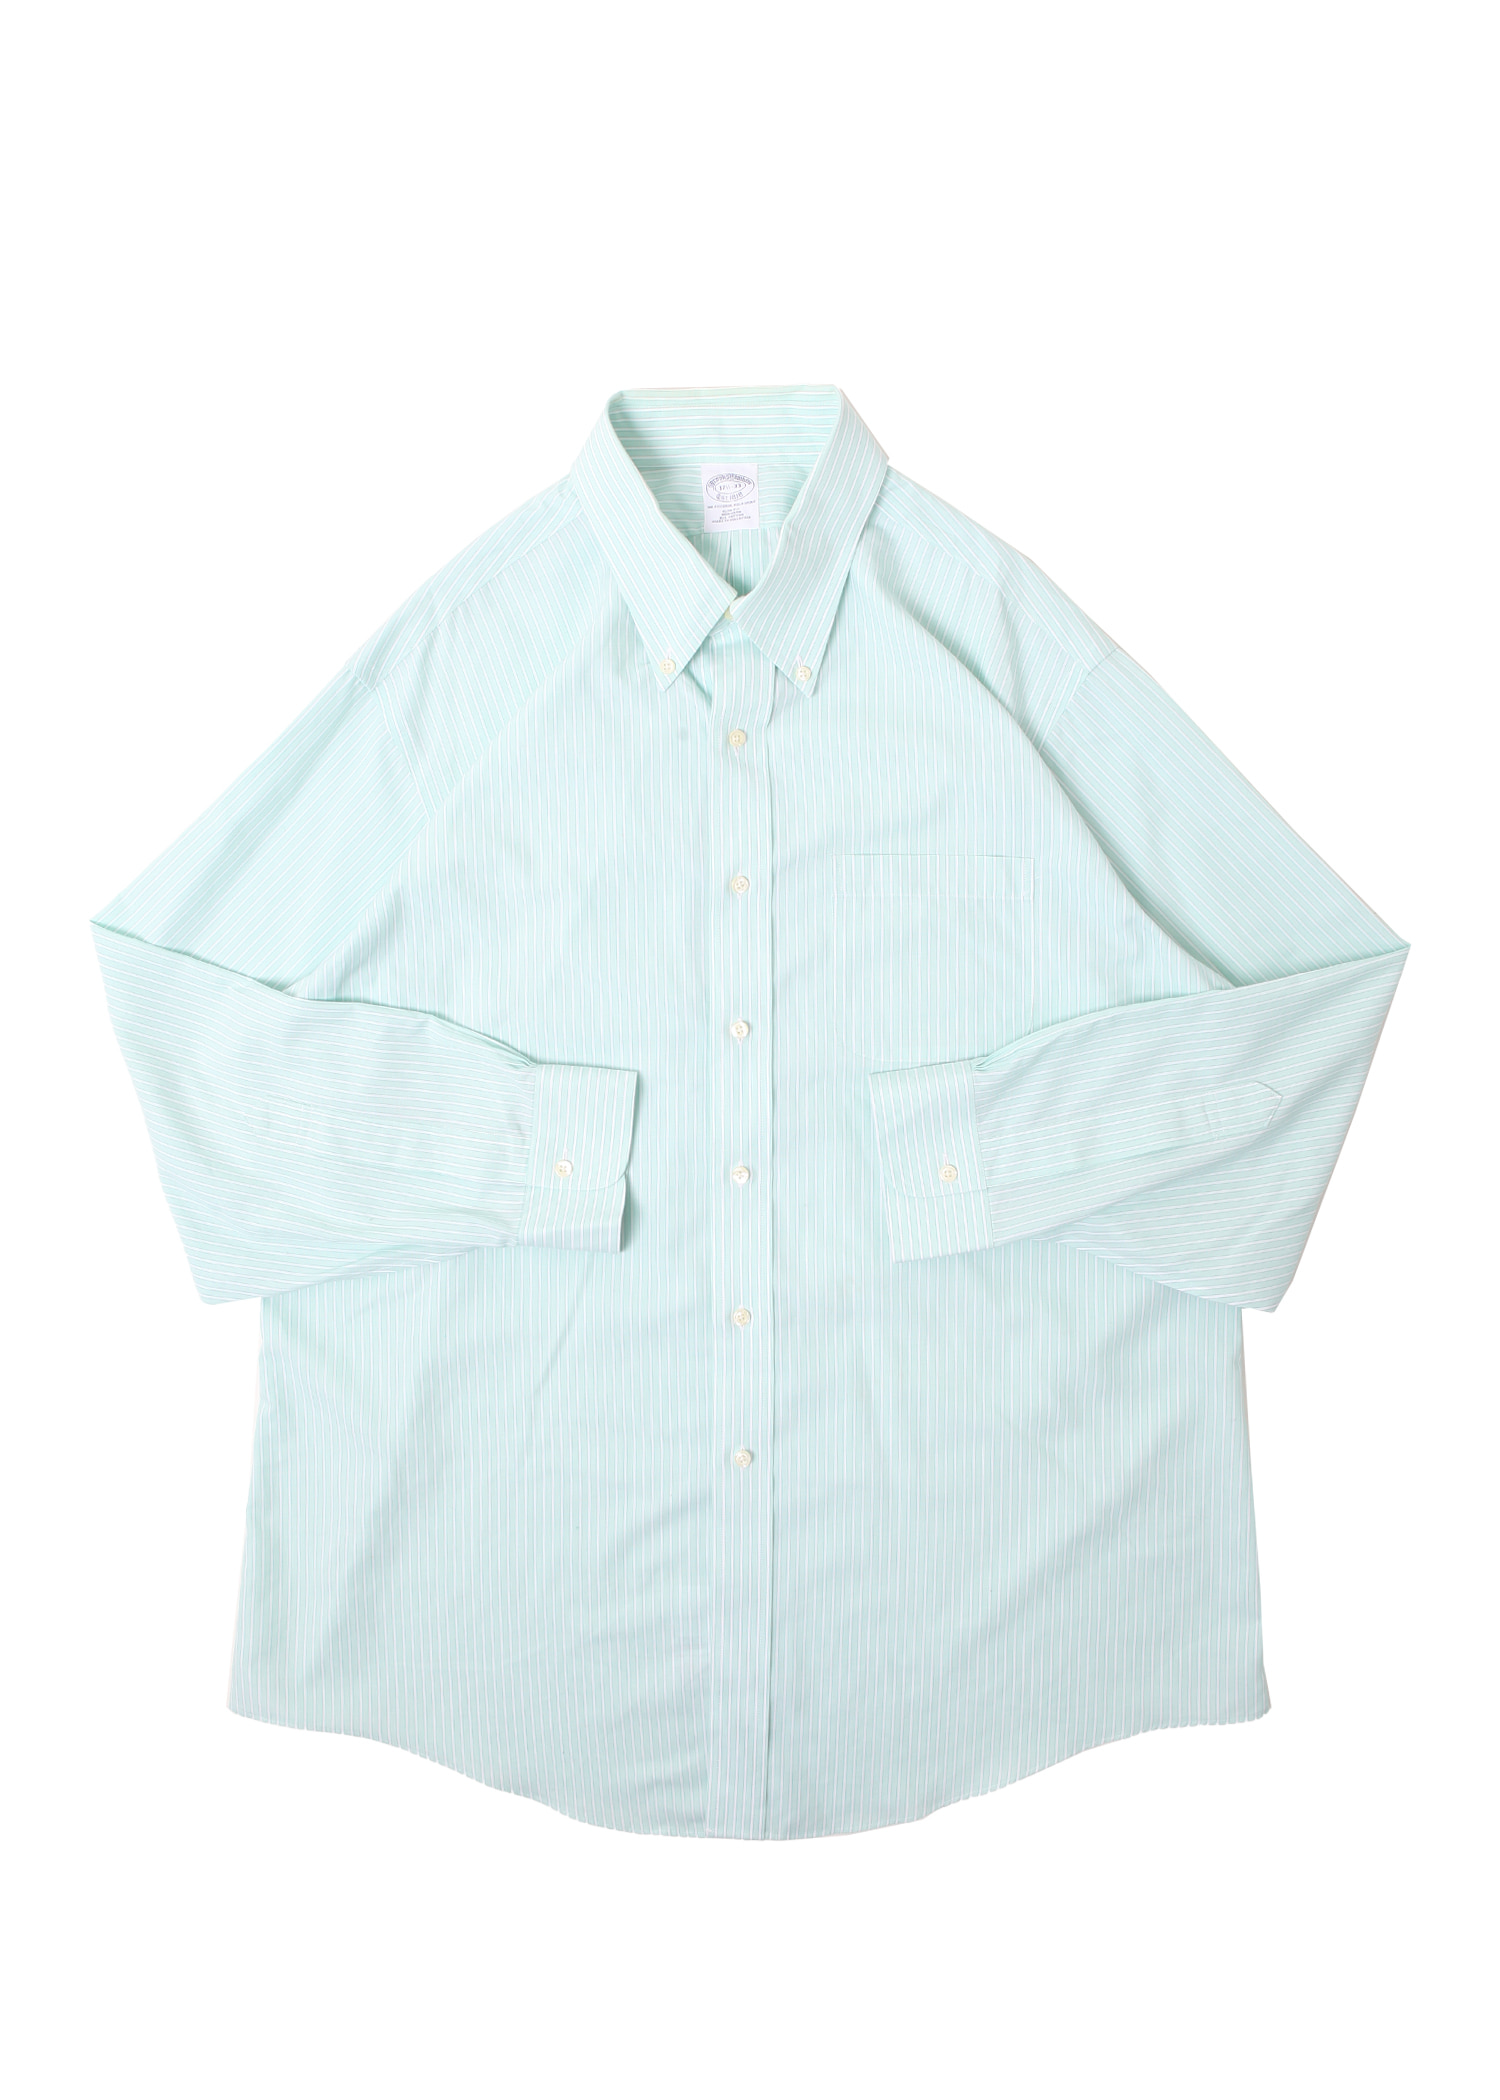 Brooks Brothers button down shirts